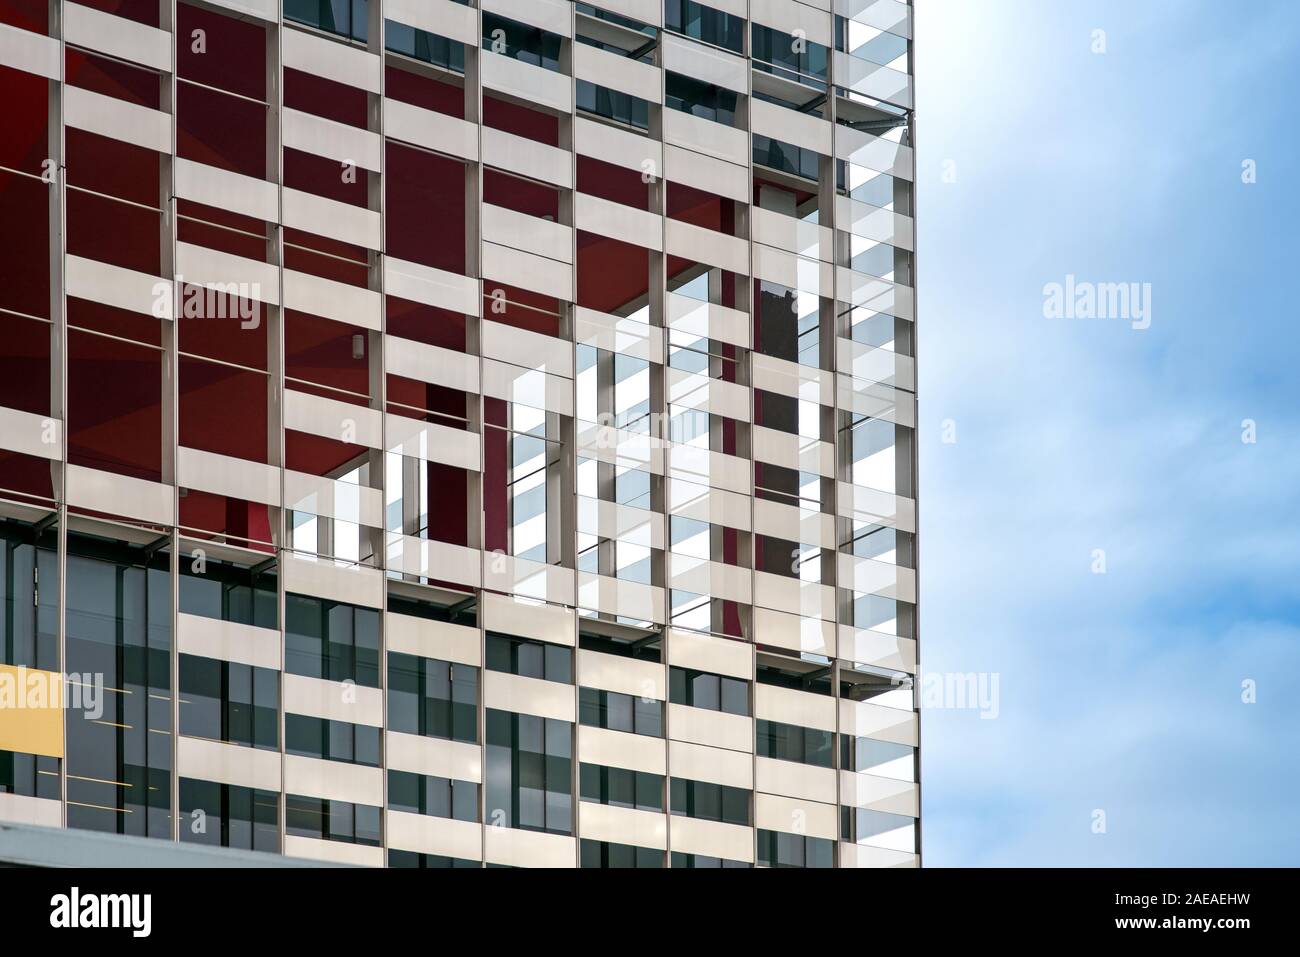 Exterior facade of a modern apartment or office block in close up detail against a hazy blue sky Stock Photo